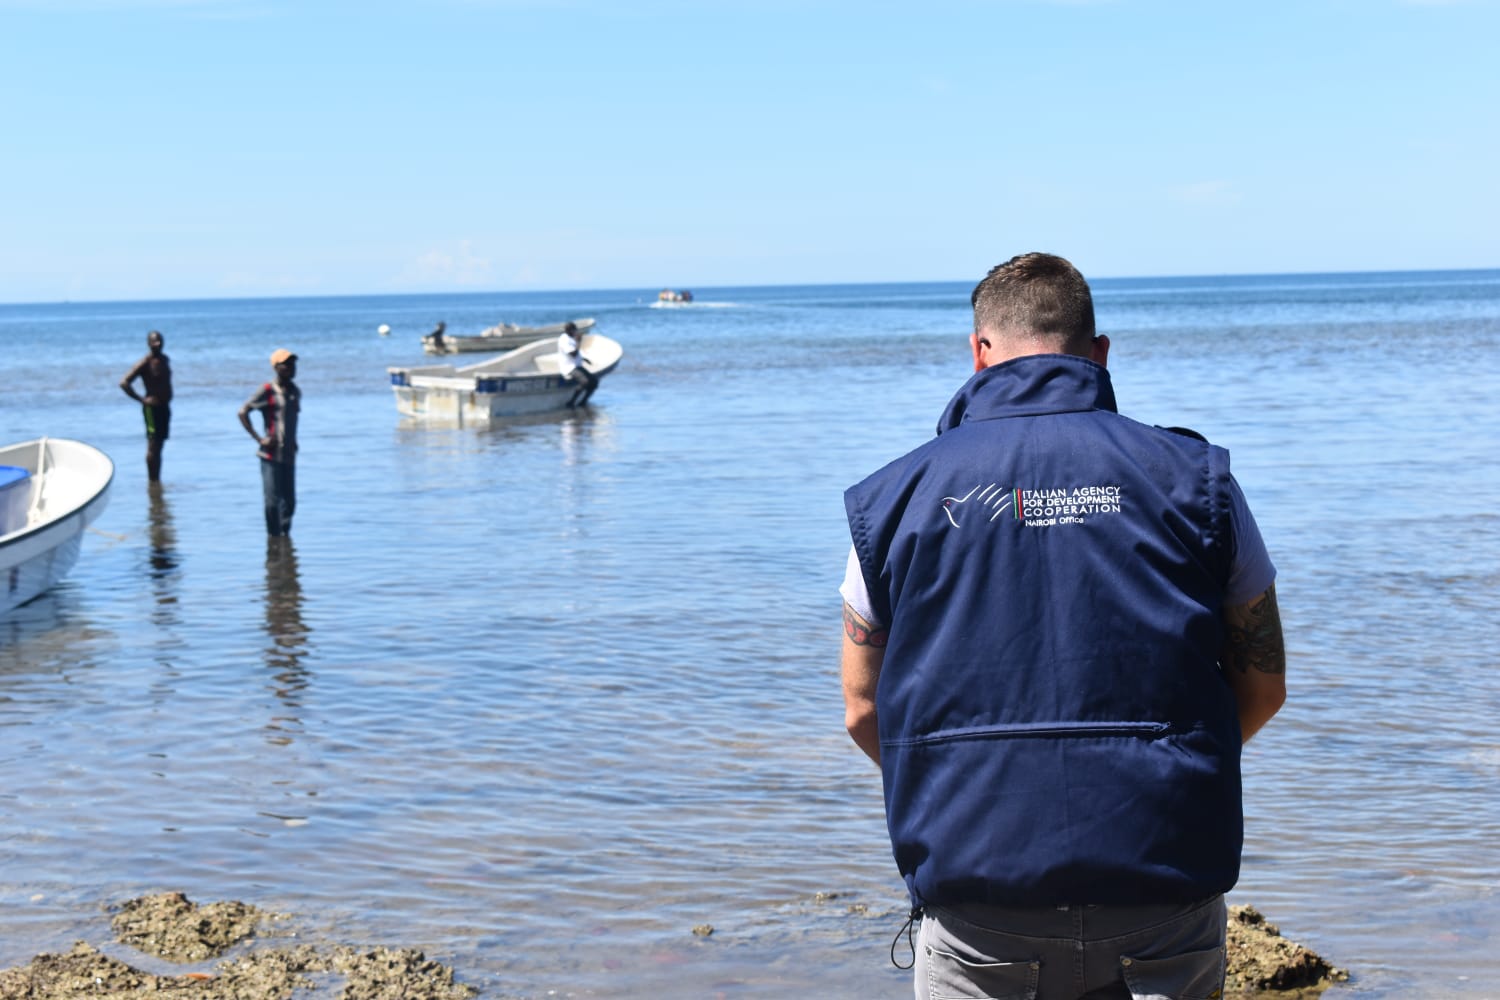 Go Blue: Italian Agency for Development Cooperation (AICS) ready to deliver boats throughout the coastal counties